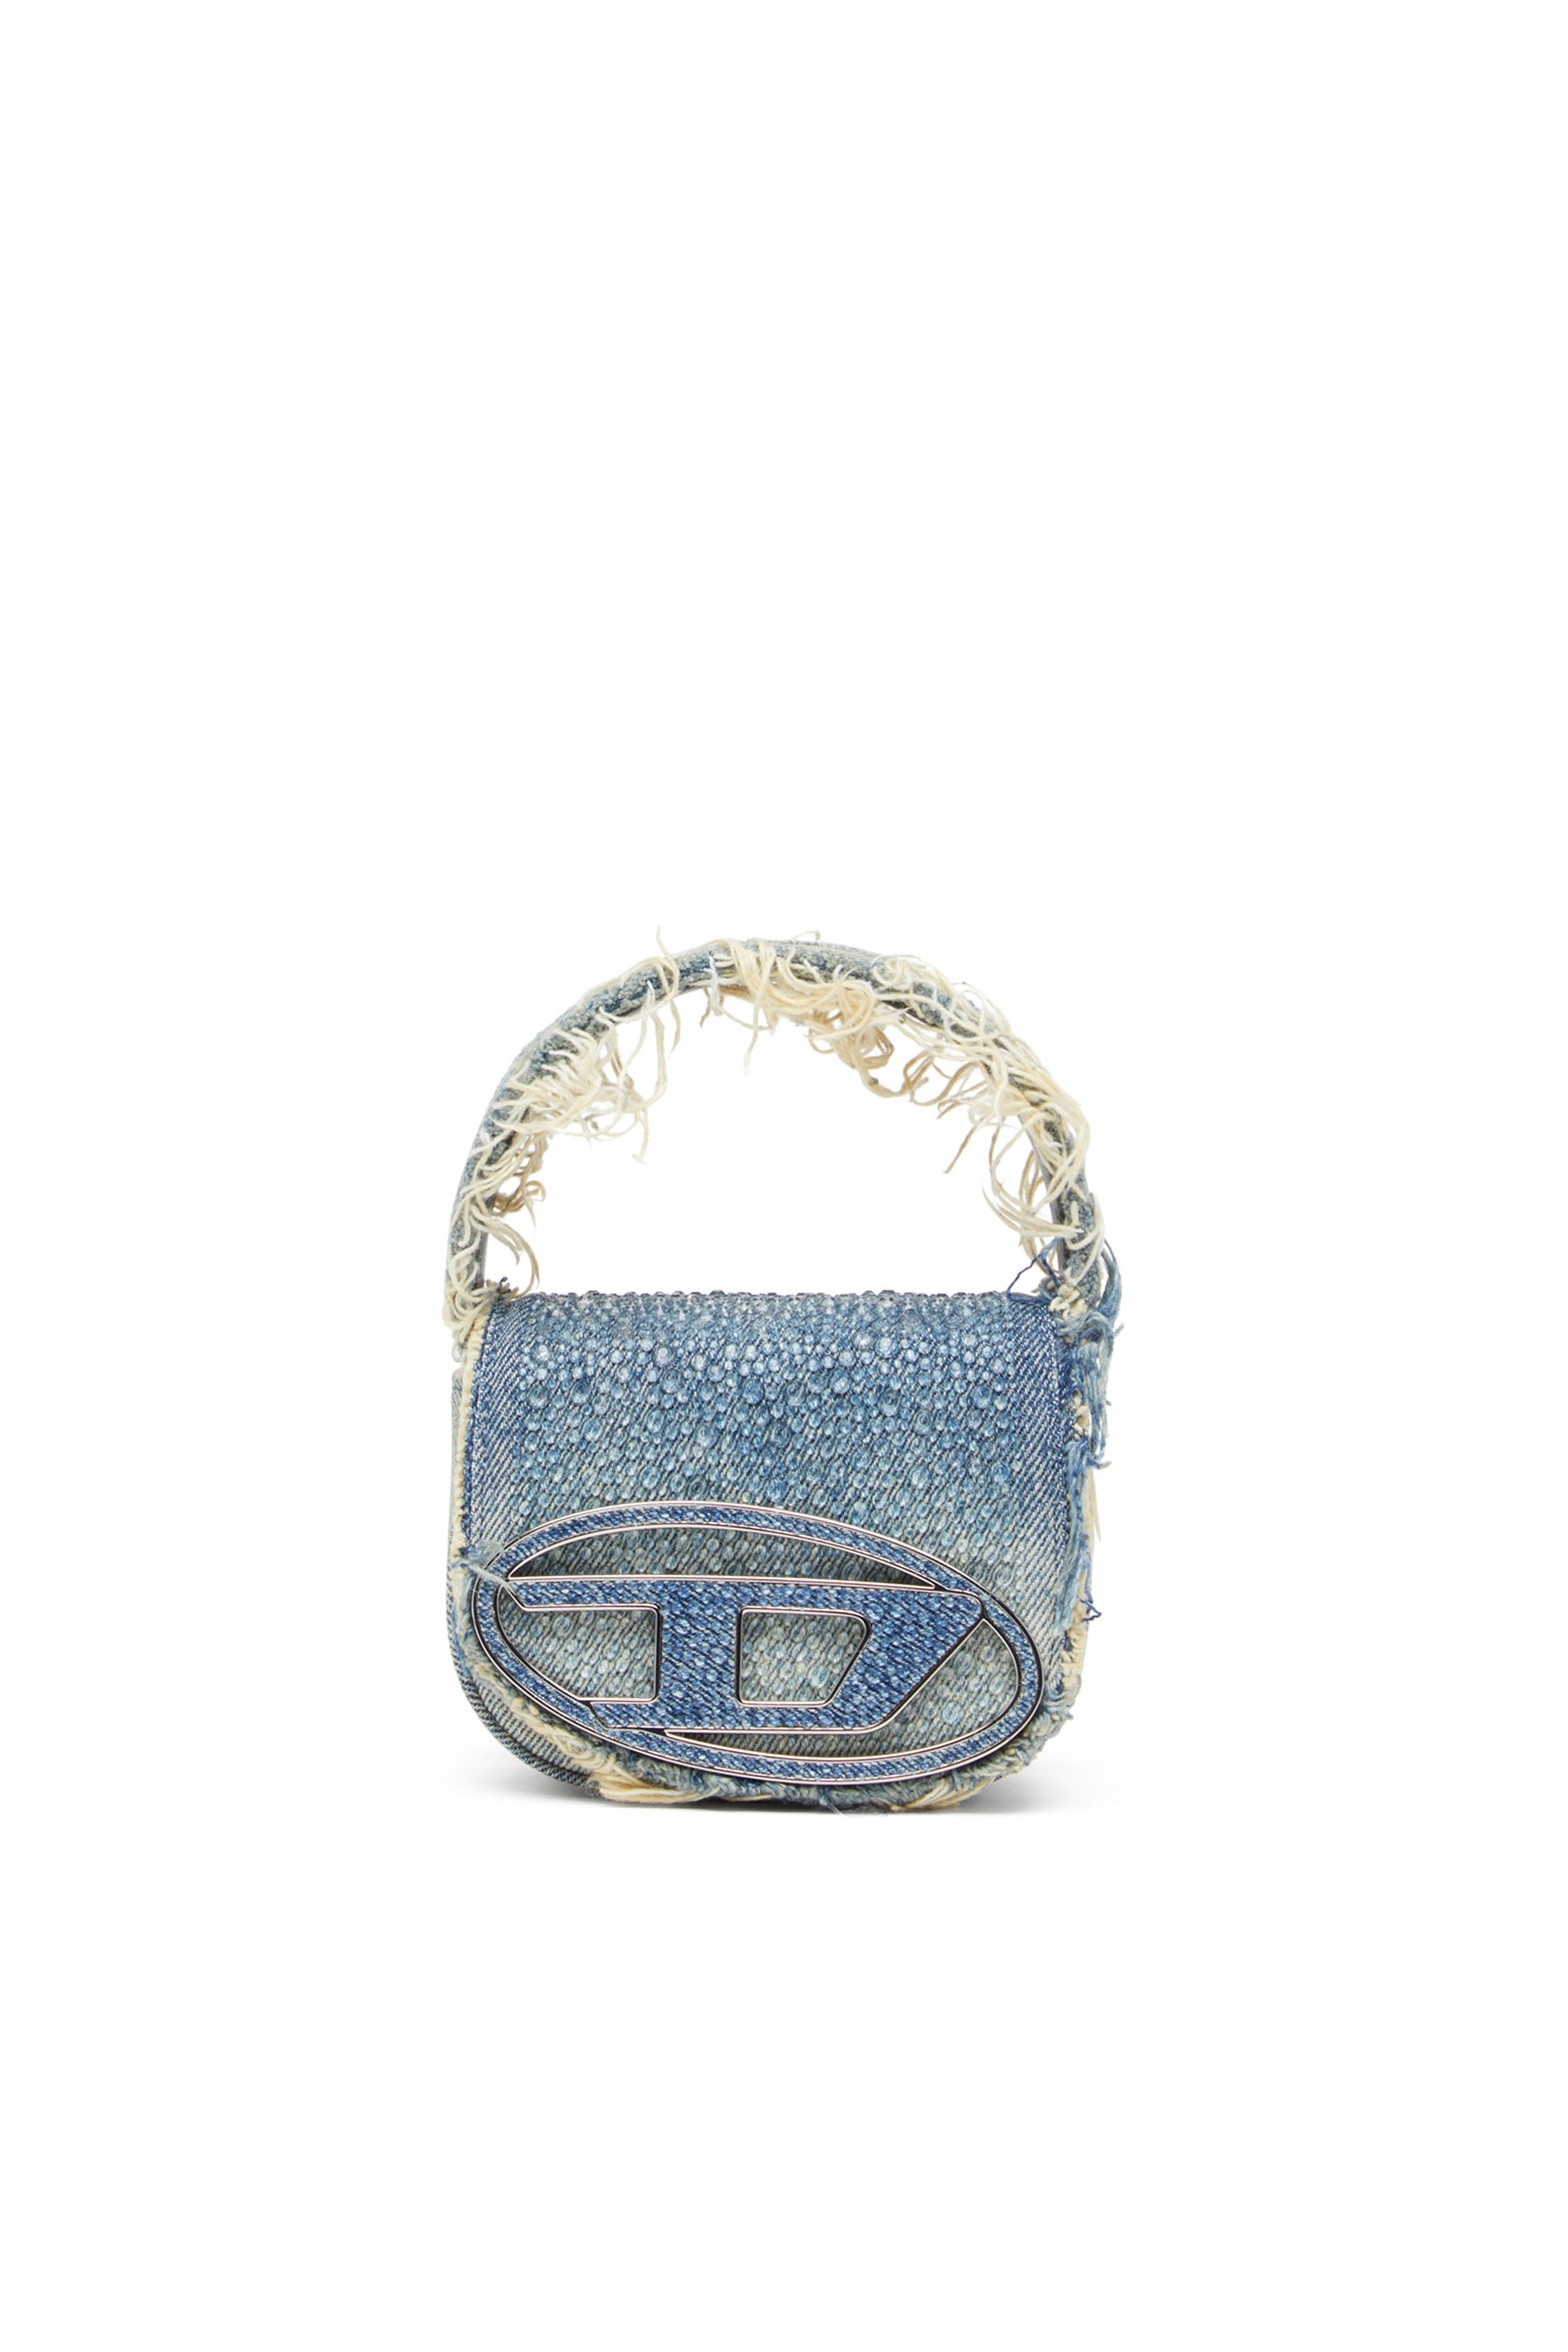 Diesel - 1DR XS, Female 1DR XS-Iconic mini bag in denim and crystals in ブルー - Image 1